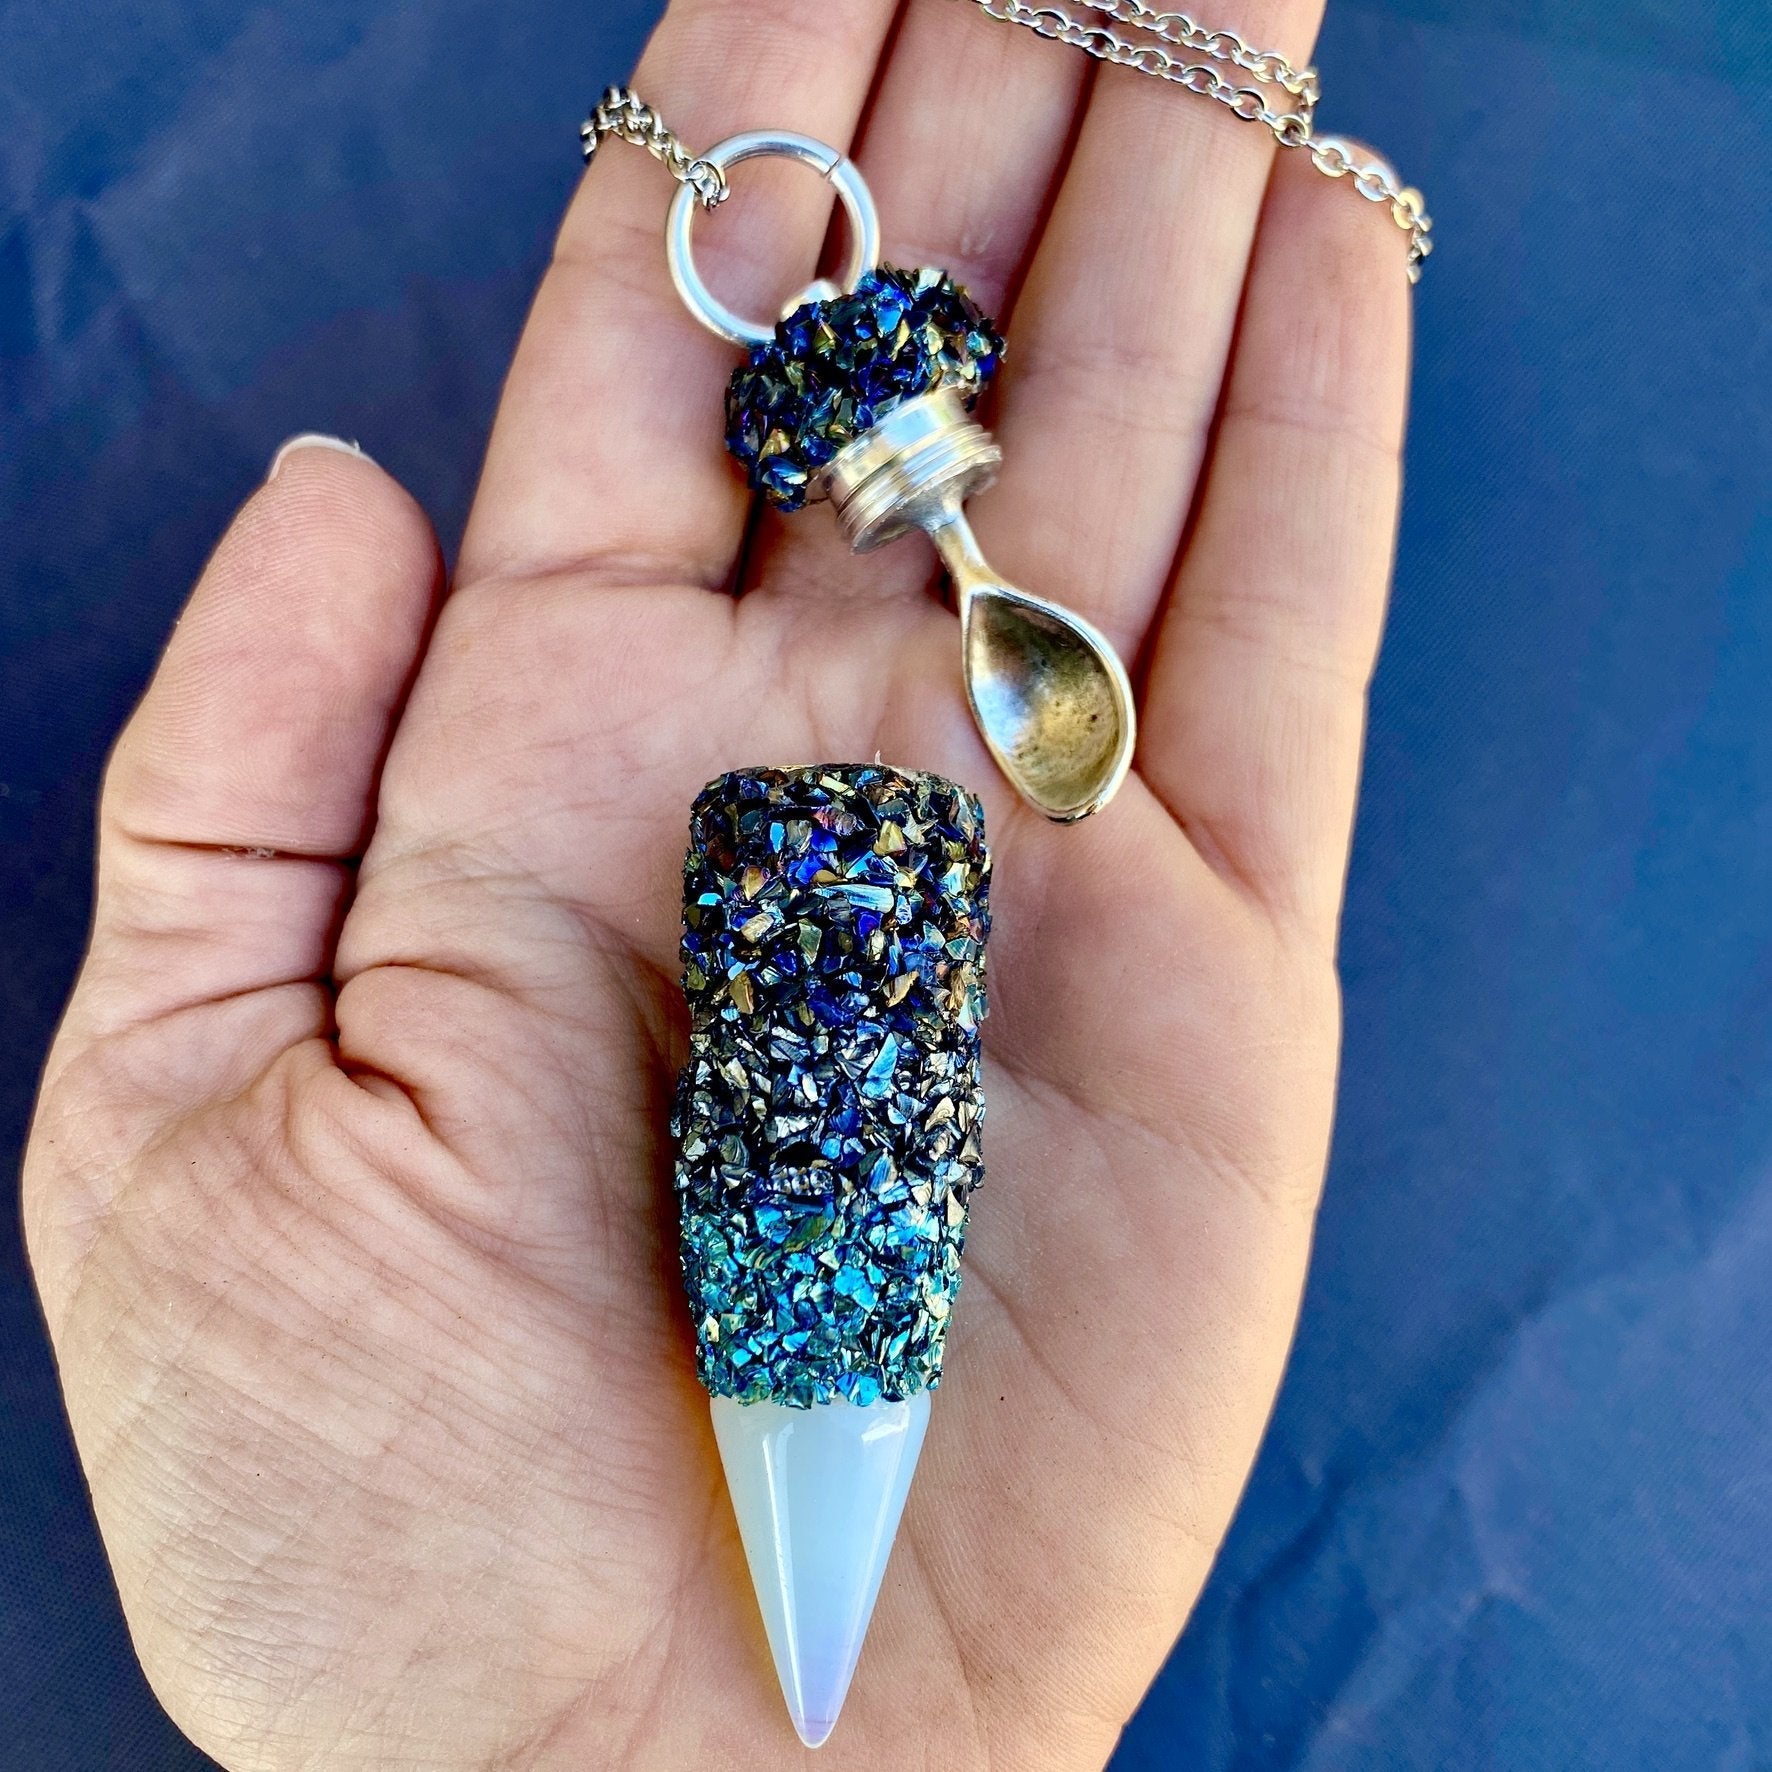 Crystal Stash Necklace with Spoon Customized Pendant + Spoon Inside Lid